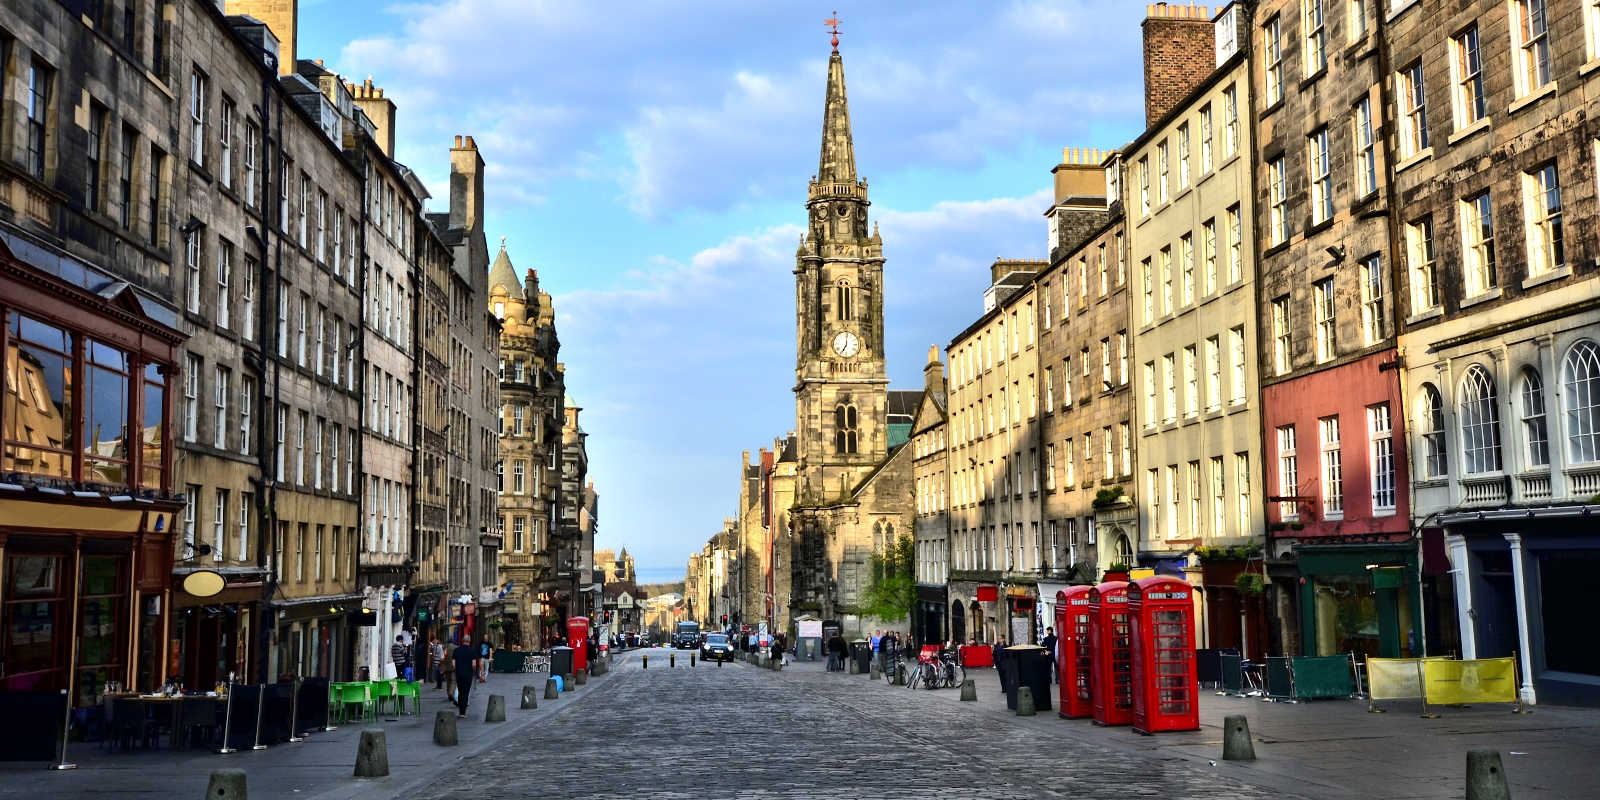 Royal Mile Attractions Hotels and Restaurants | Edinburgh Tourist